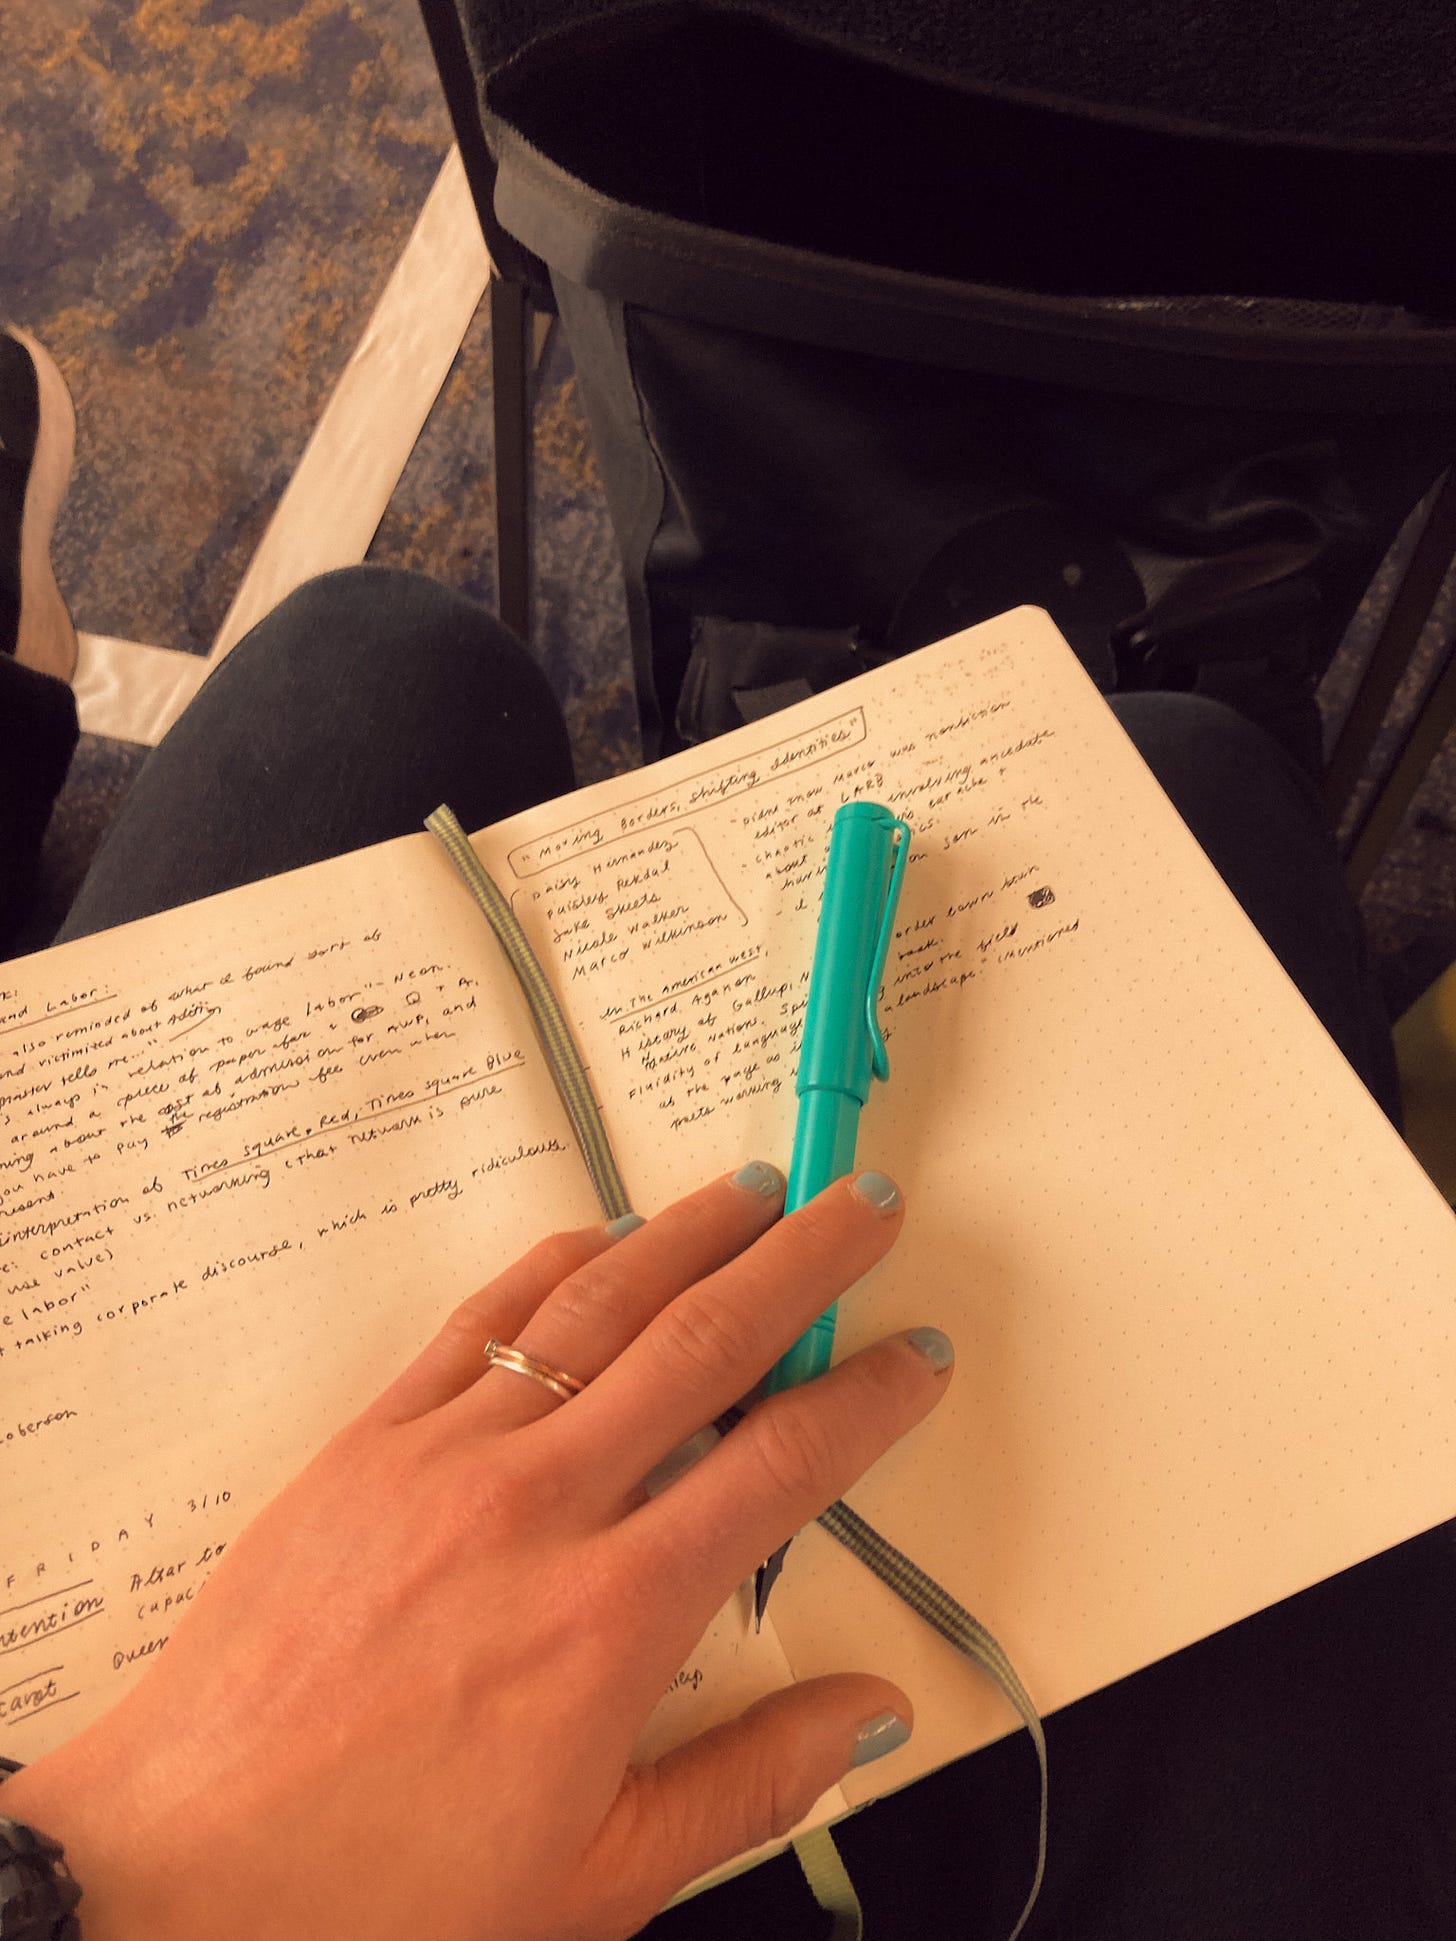 Siloh's hand on a notebook with a green pen. The pages are partially filled with handwriting.